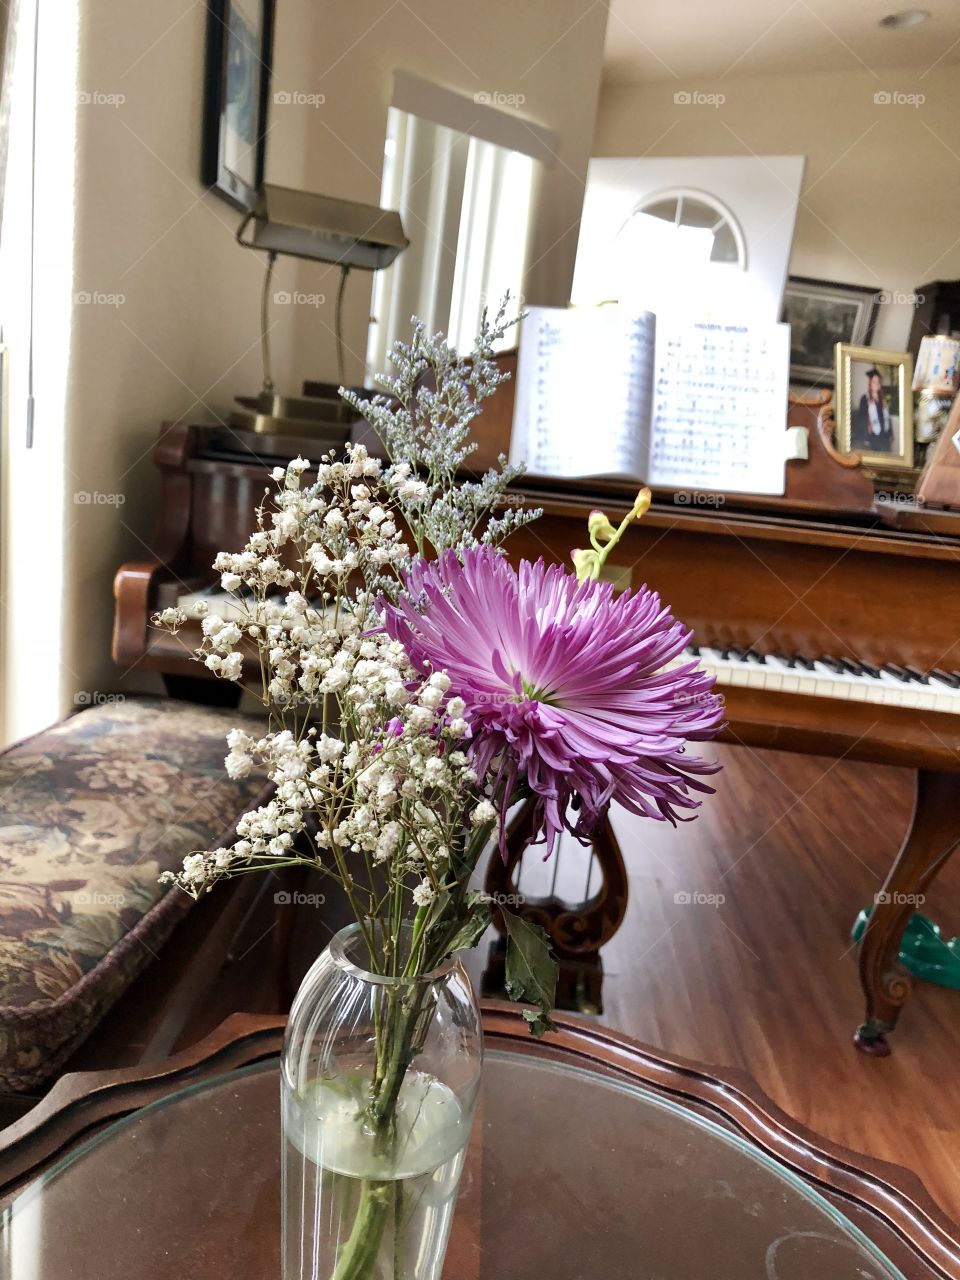 Lilac flowers in vase in front of piano.